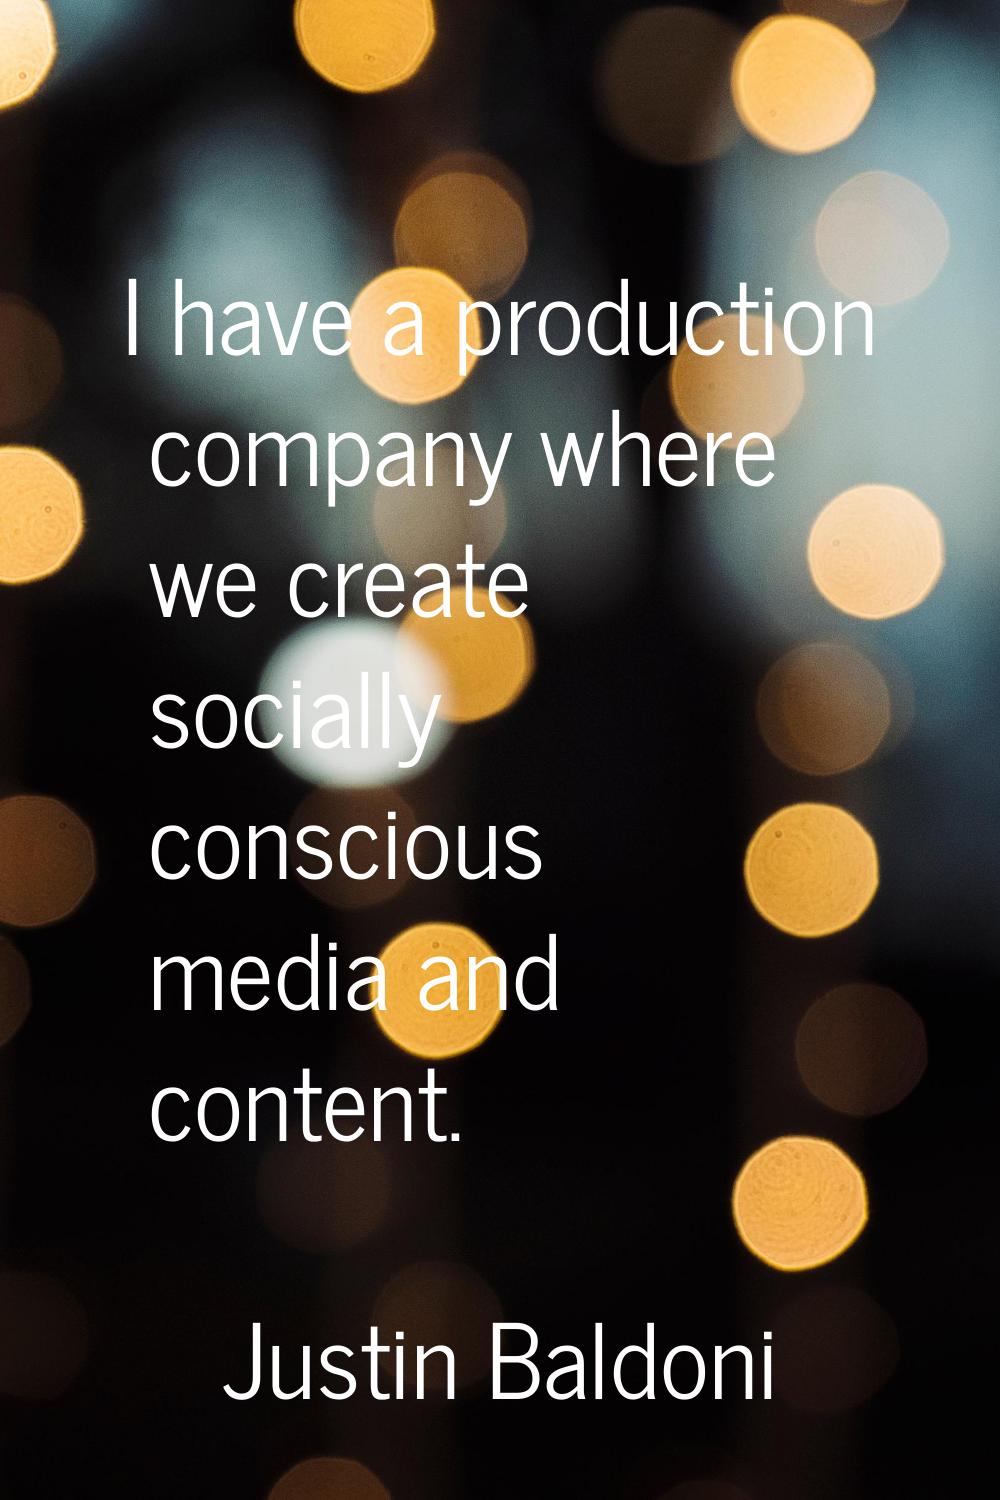 I have a production company where we create socially conscious media and content.